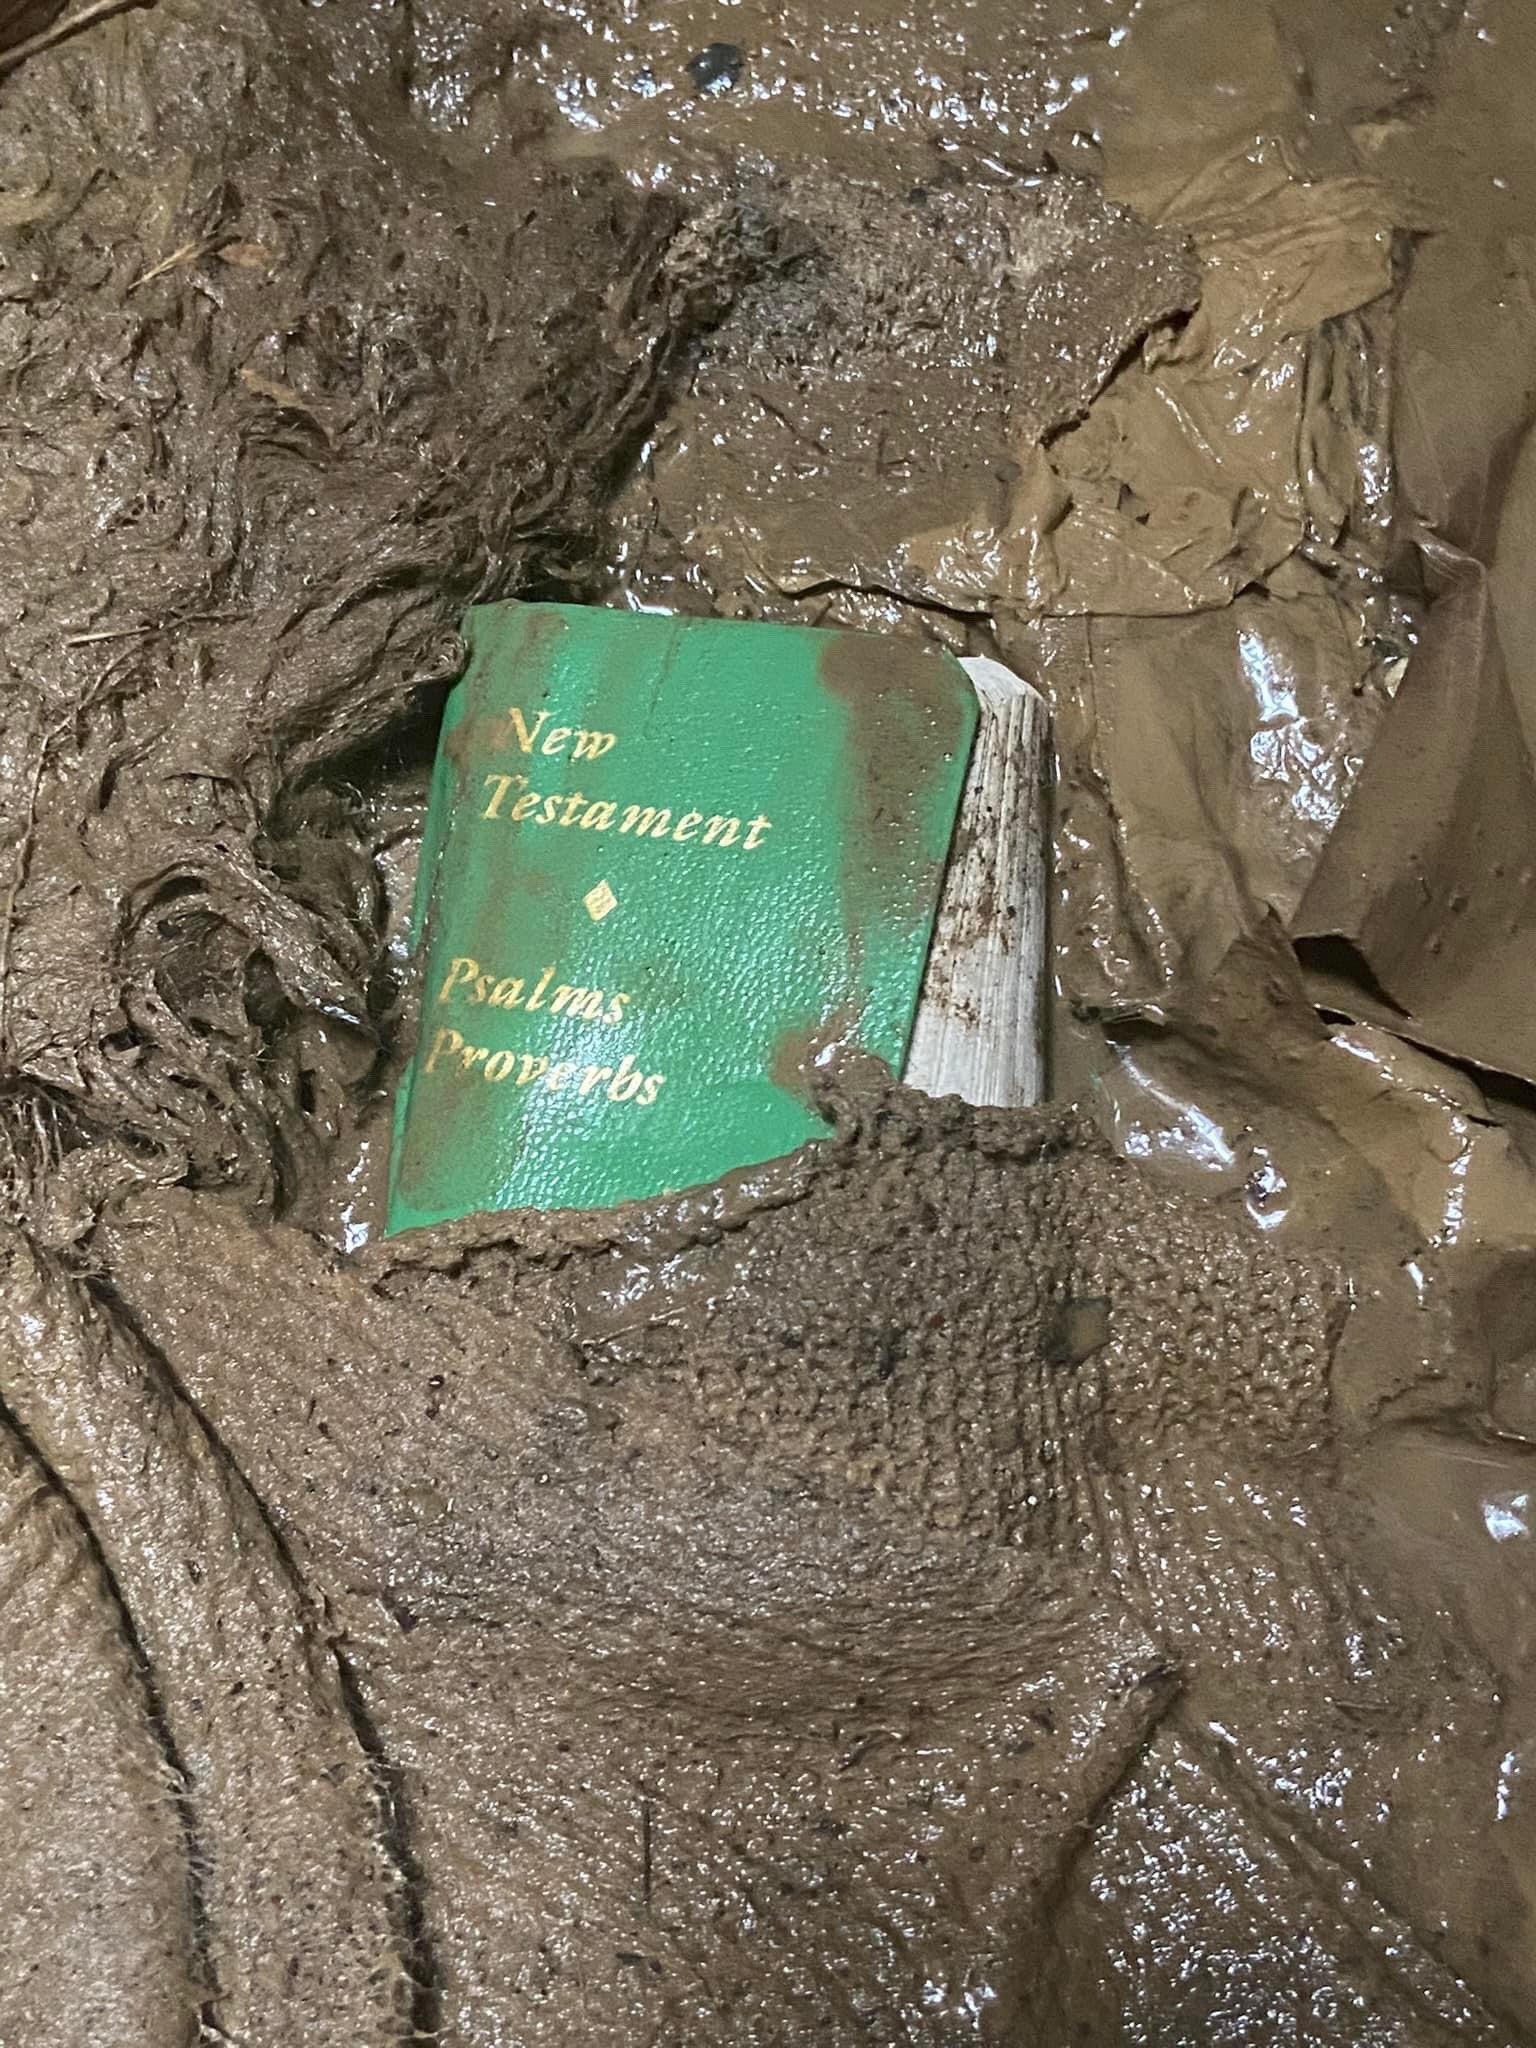 New Testament Found in the mud of Kentucky flooding - with all the recent rain and flooding in Kentucky, a New Testament Bible was found in the mud. #Kentucky